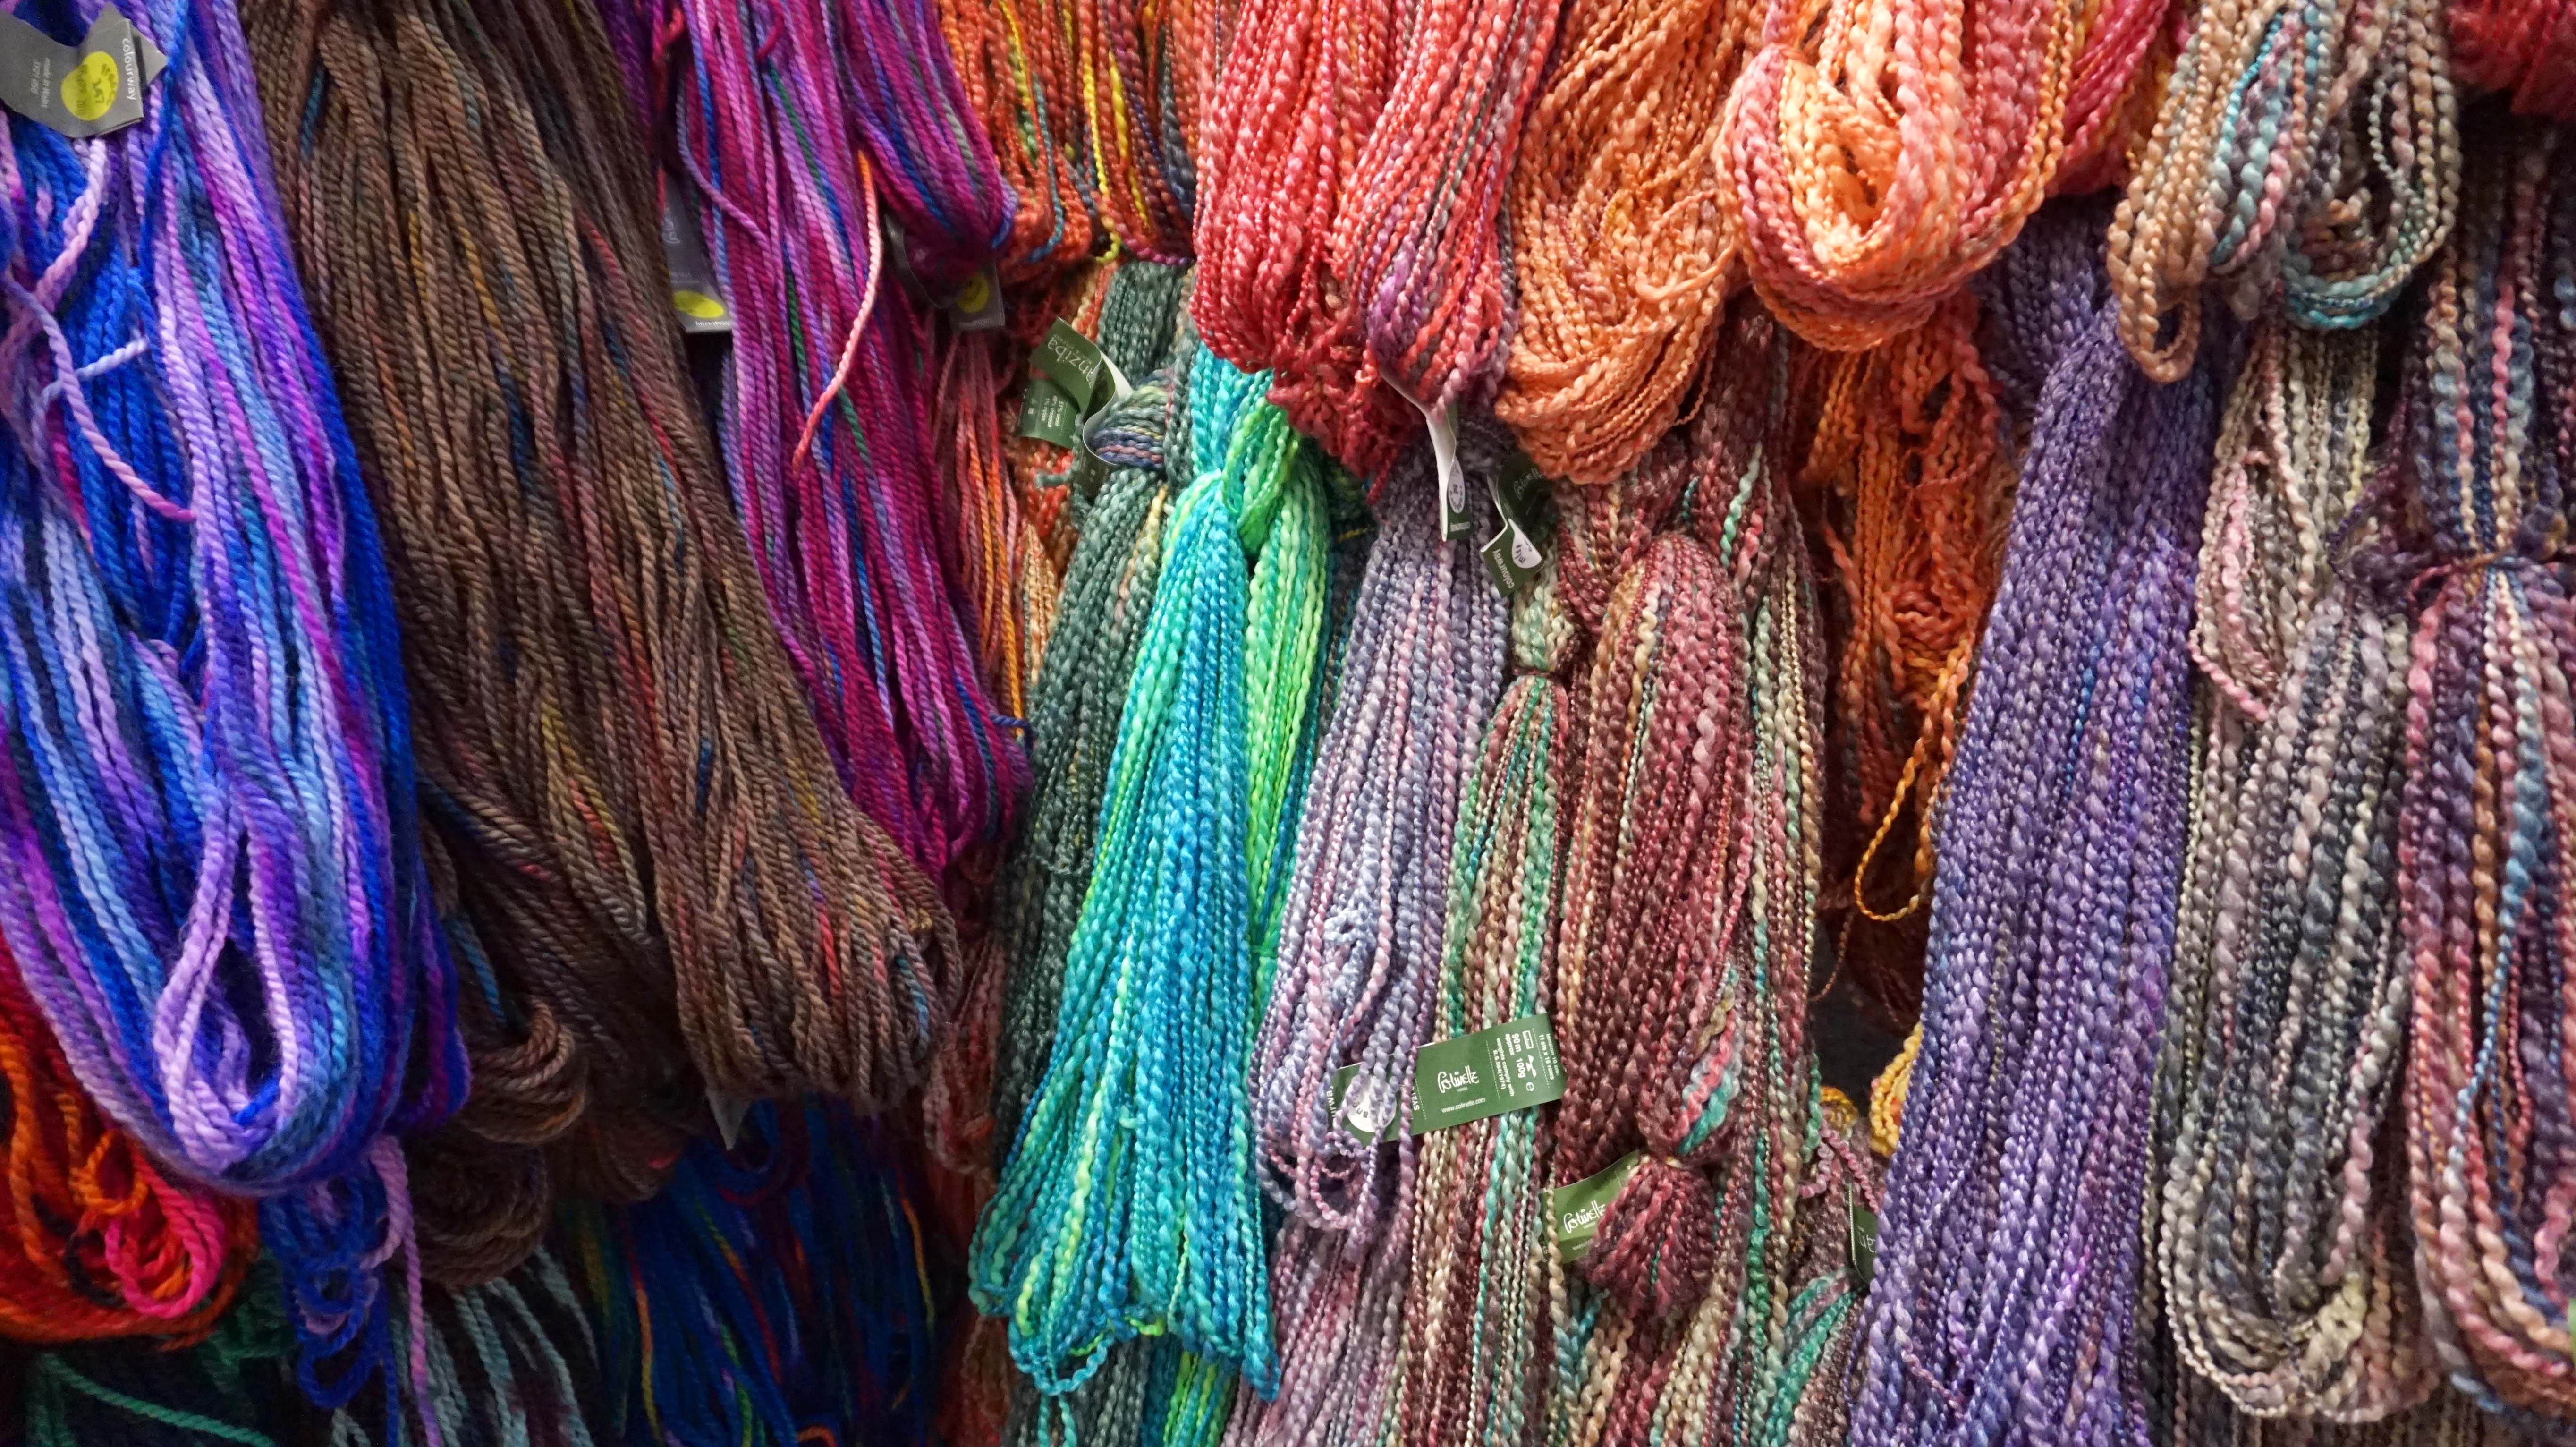 Loops of wool at the Knitting and Stitching Show 2017